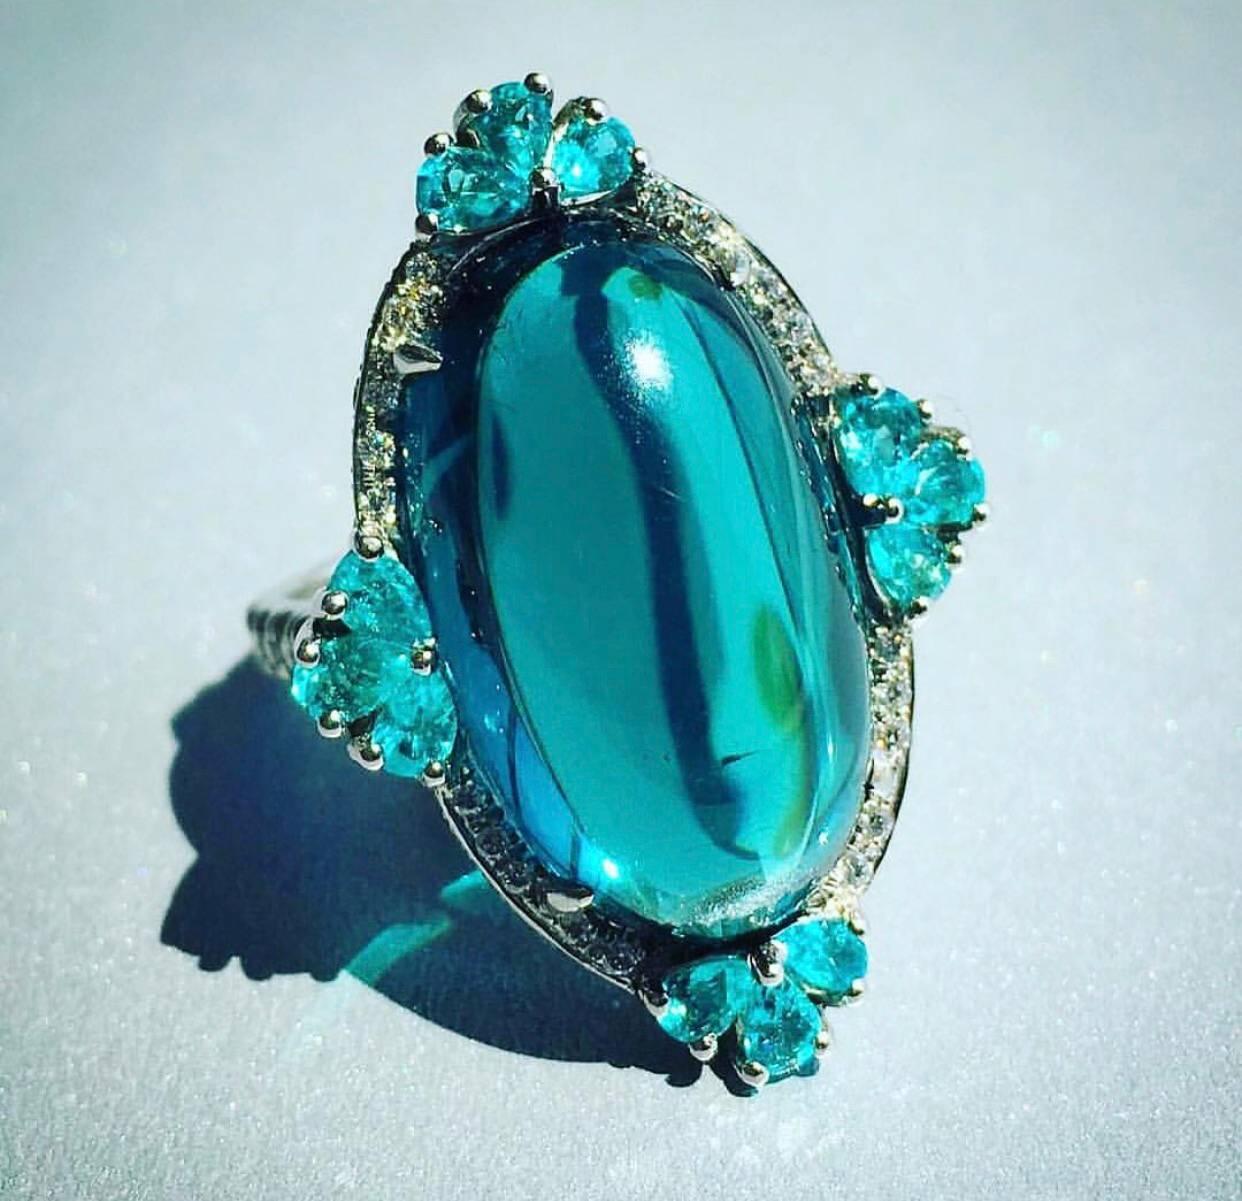  Blue Tourmaline, Indiculite in the Platinum setting is one of the best  gems available   Blue Color  Gem is   pure Teal and clean, which is rare for this type of stone. Accented with 12  Pear shape Brazilian Paraiba Tourmaline's, enhanced with